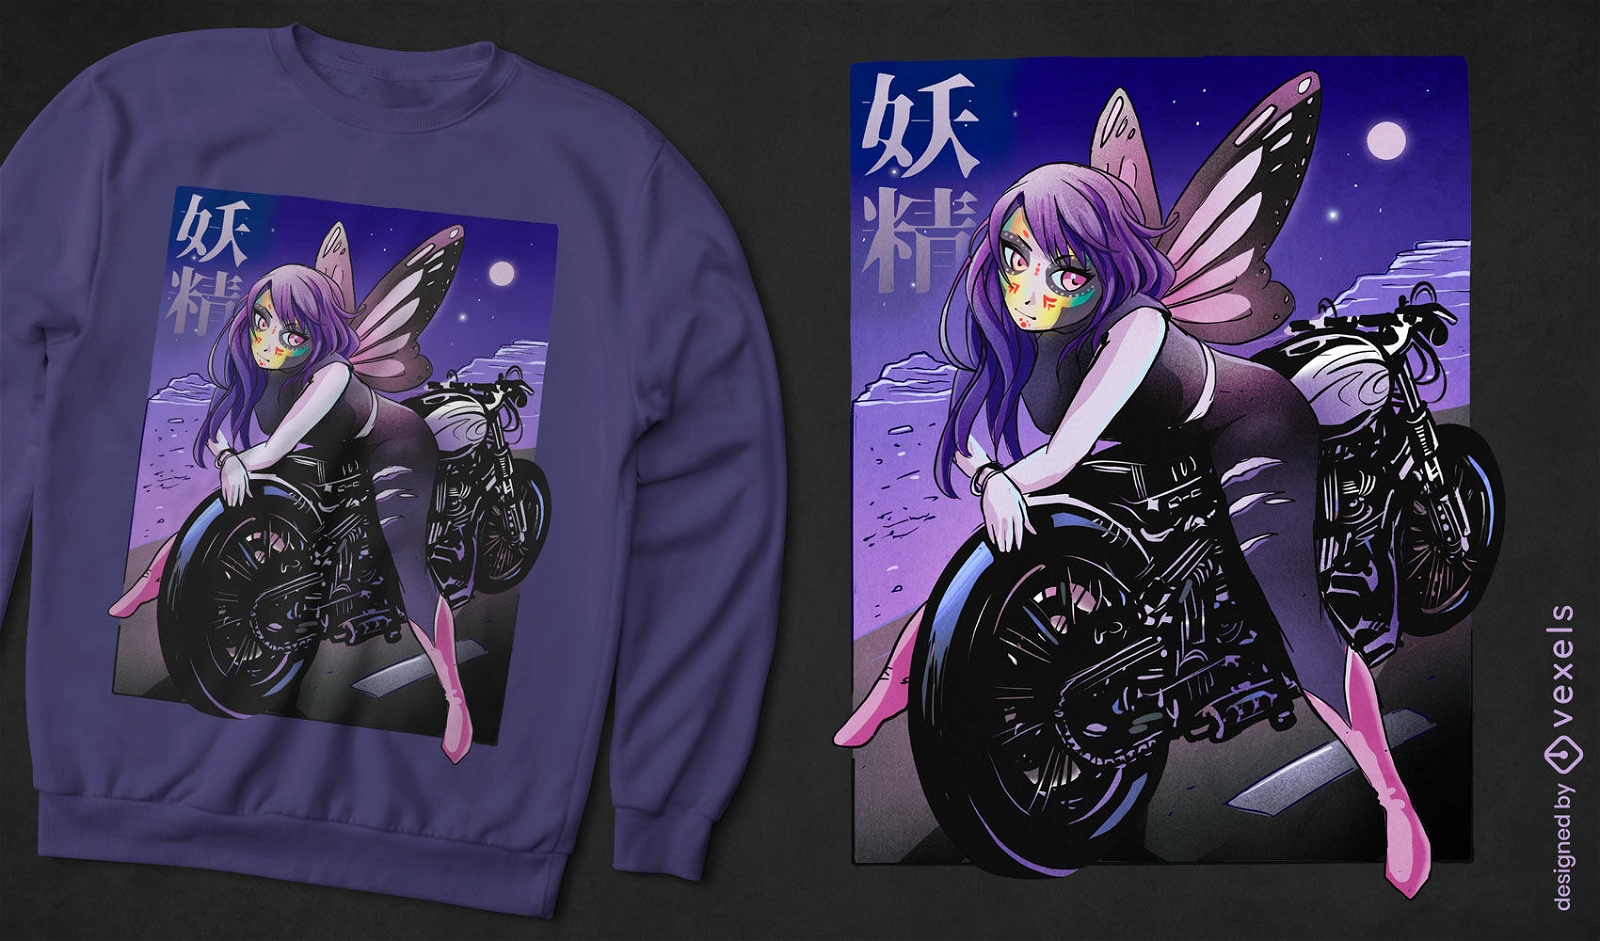 Fairy on motorcycle t-shirt design